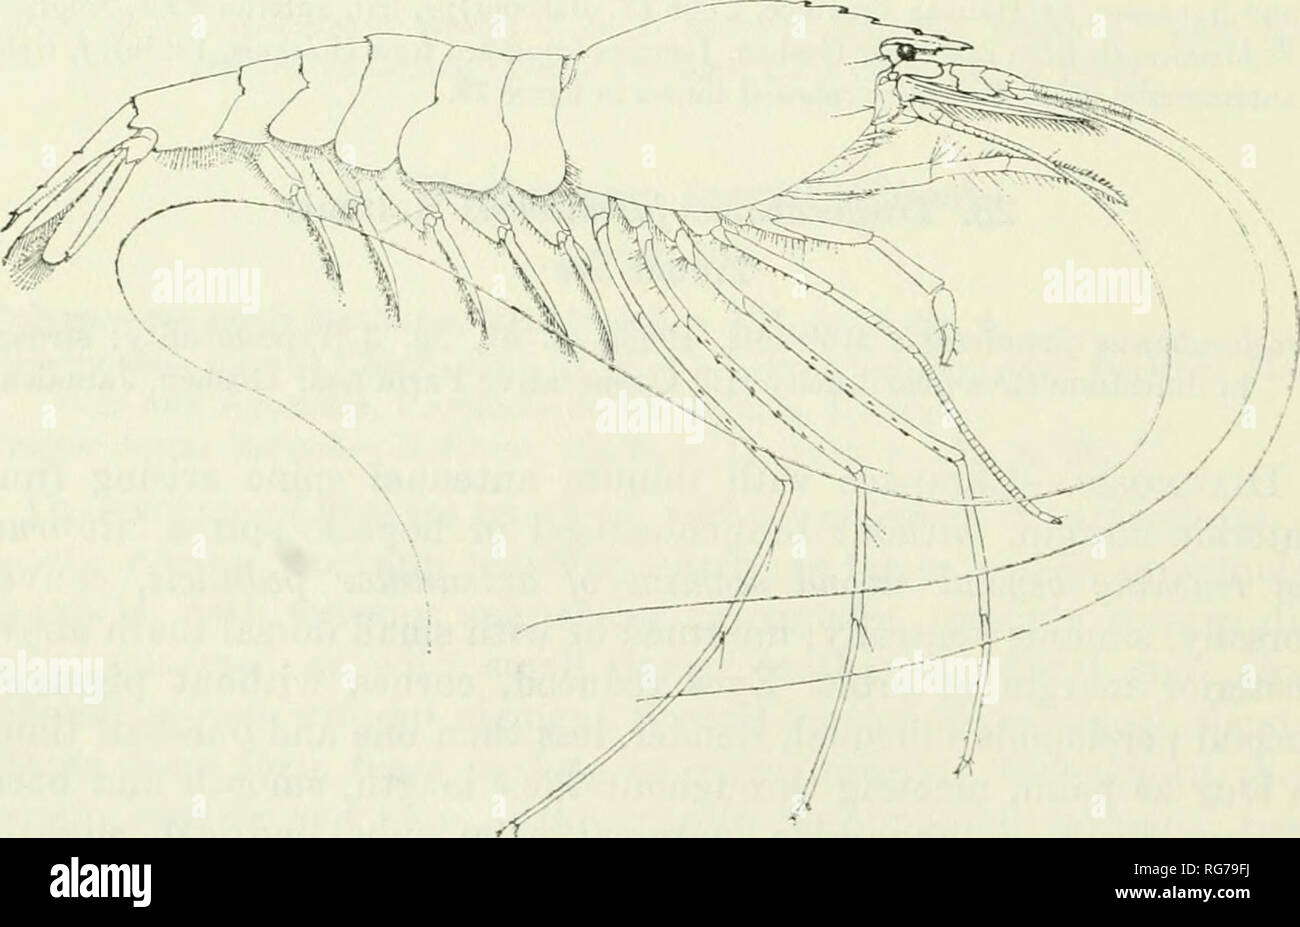 . Bulletin - United States National Museum. Science. 116 U.S. NATIONAL MUSEUM BULLETIN 292 as long as merus. Third pereiopod dth propodus only about twice as long as dactyl. A small species, maximum postorbital carapace length 9 mm. Habitat.—Subterranean fresh water. Distribution.—KnowTi only from the type-locality, a cave near Goshen, Jamaica. Family Hippolytidae Genus Barhouria 29. Barhouria cubensis (Von Martens) Figures 28/, 29 Hippolyte Cubensis Yon Martens, 1872, p. 136, pi. 5: fig. 14 [type-locality: Cuba]. Hippolysmata cubensis.—Kingsley, 1878b, p. 89. Barbouria poeyi Rathbun, 1912,  Stock Photo